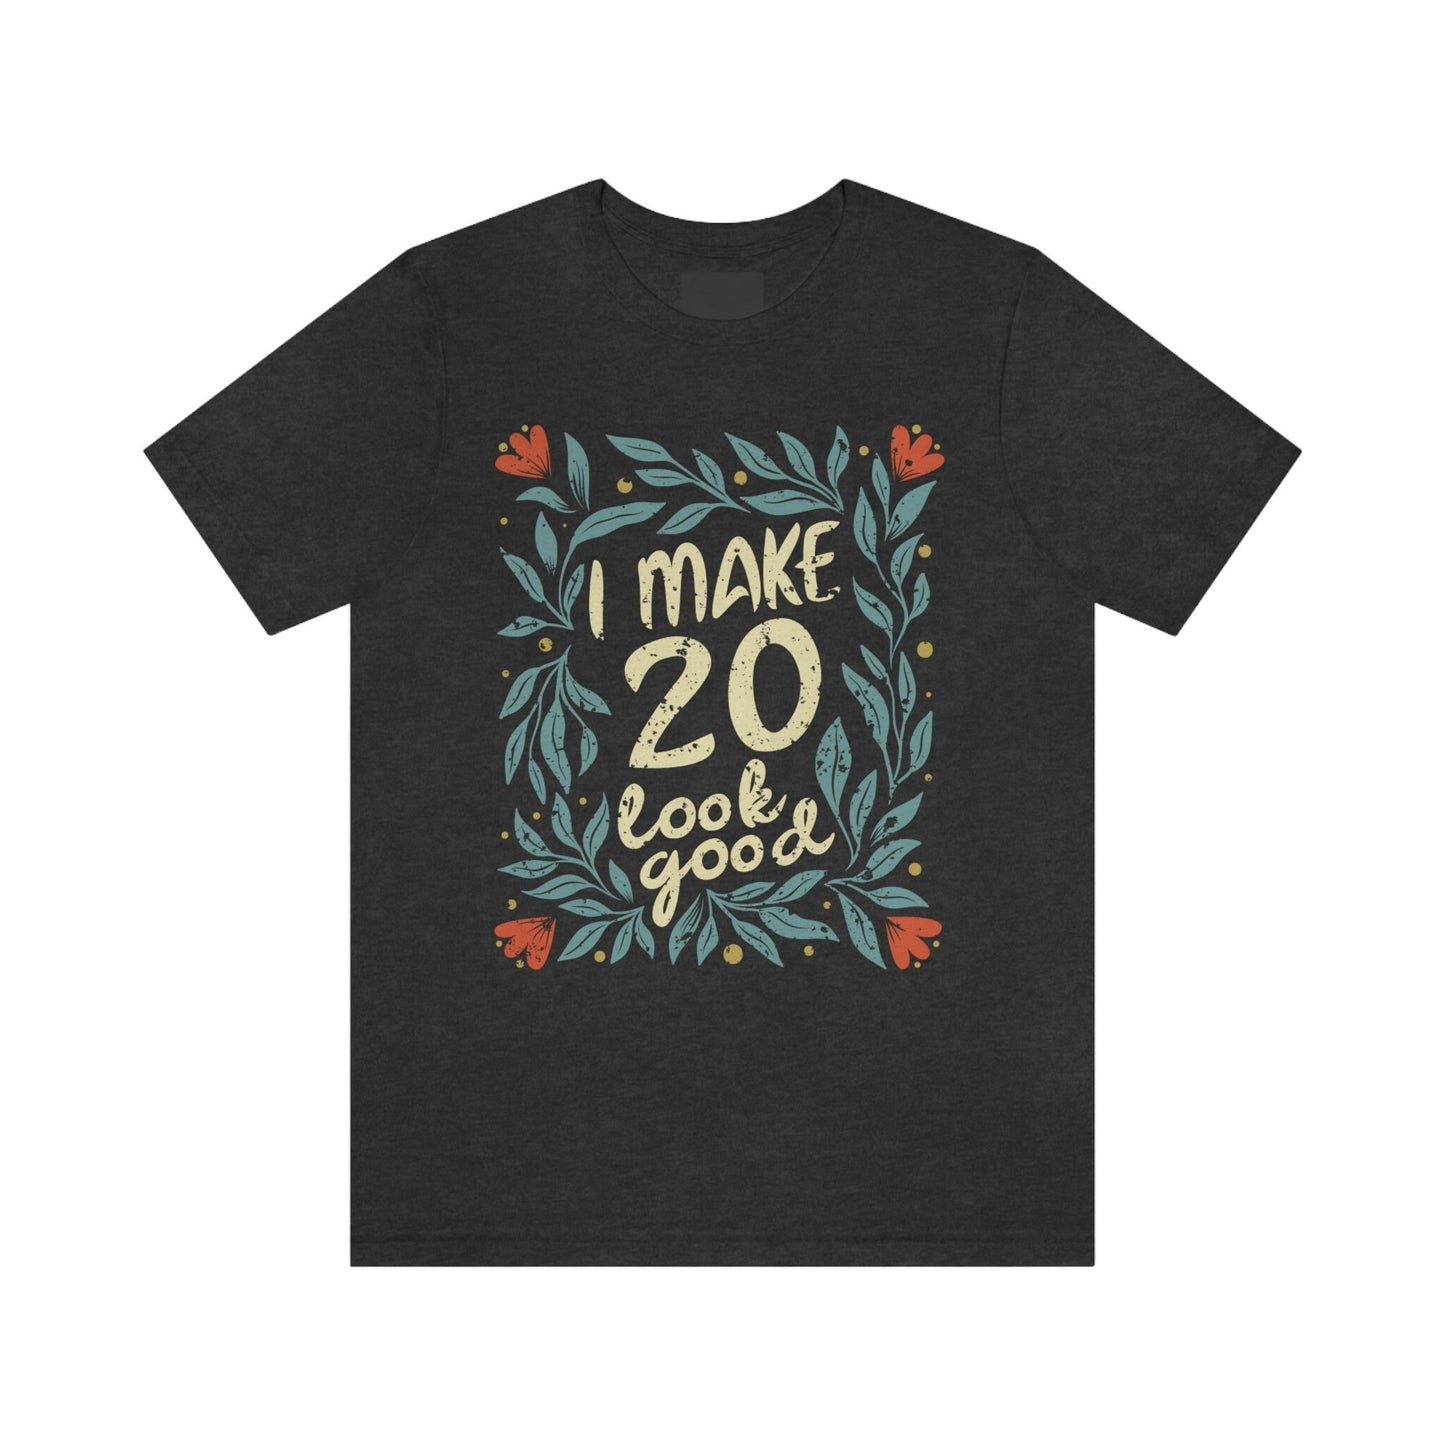 I Make 20 Look Good gift t-shirt for daughter or niece